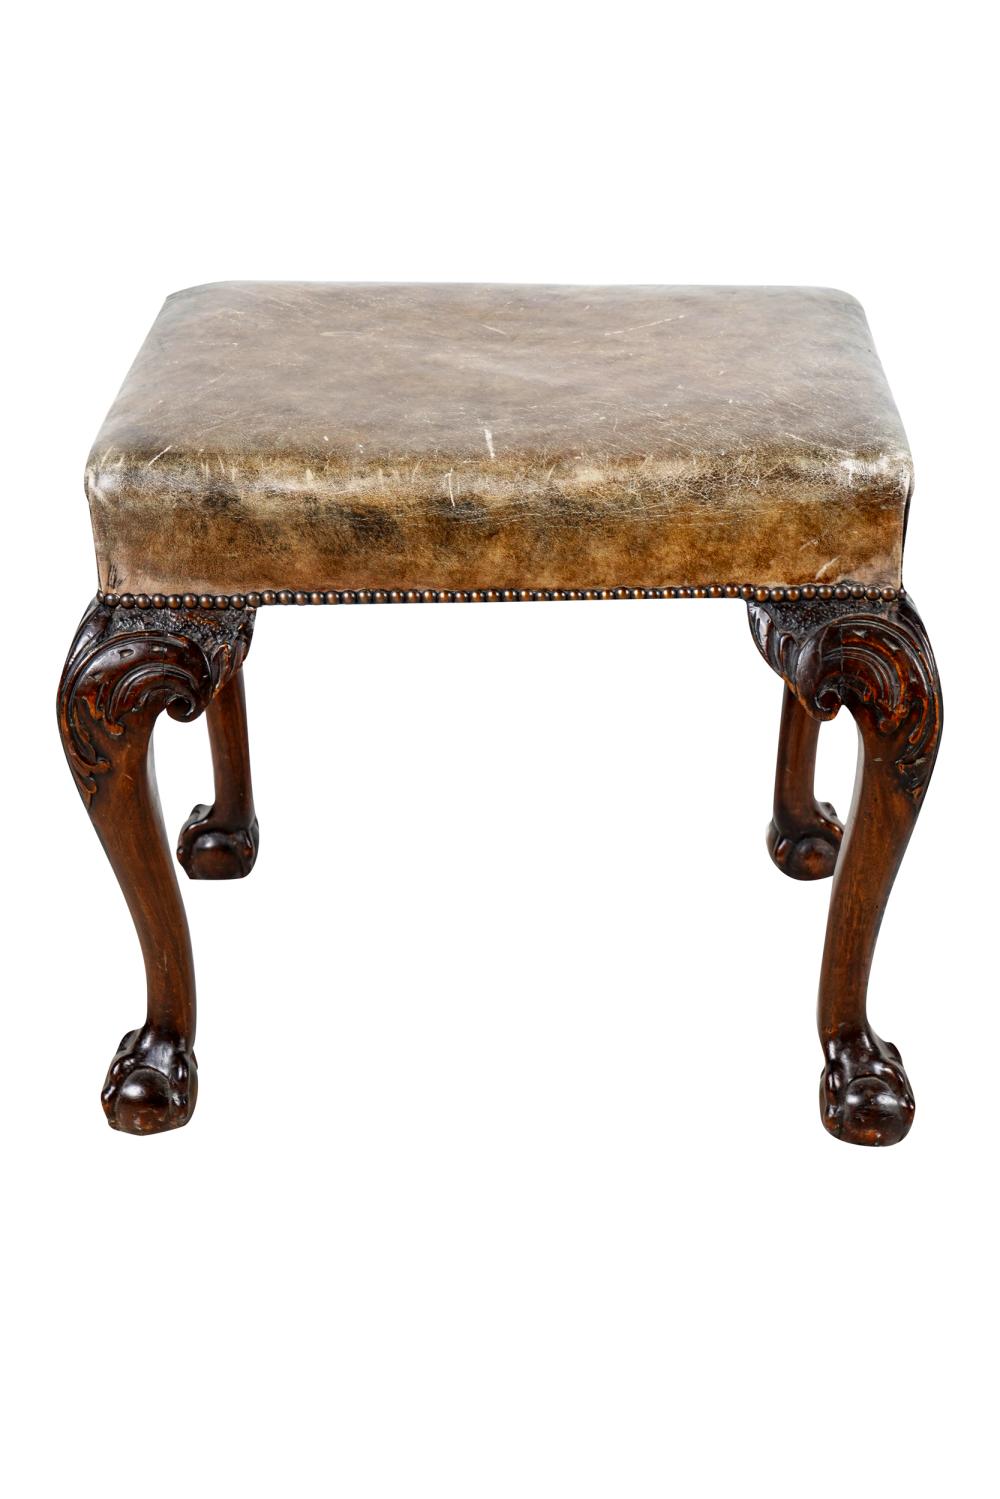 CHIIPPENDALE STYLE MAHOGANY BENCHwith 337778